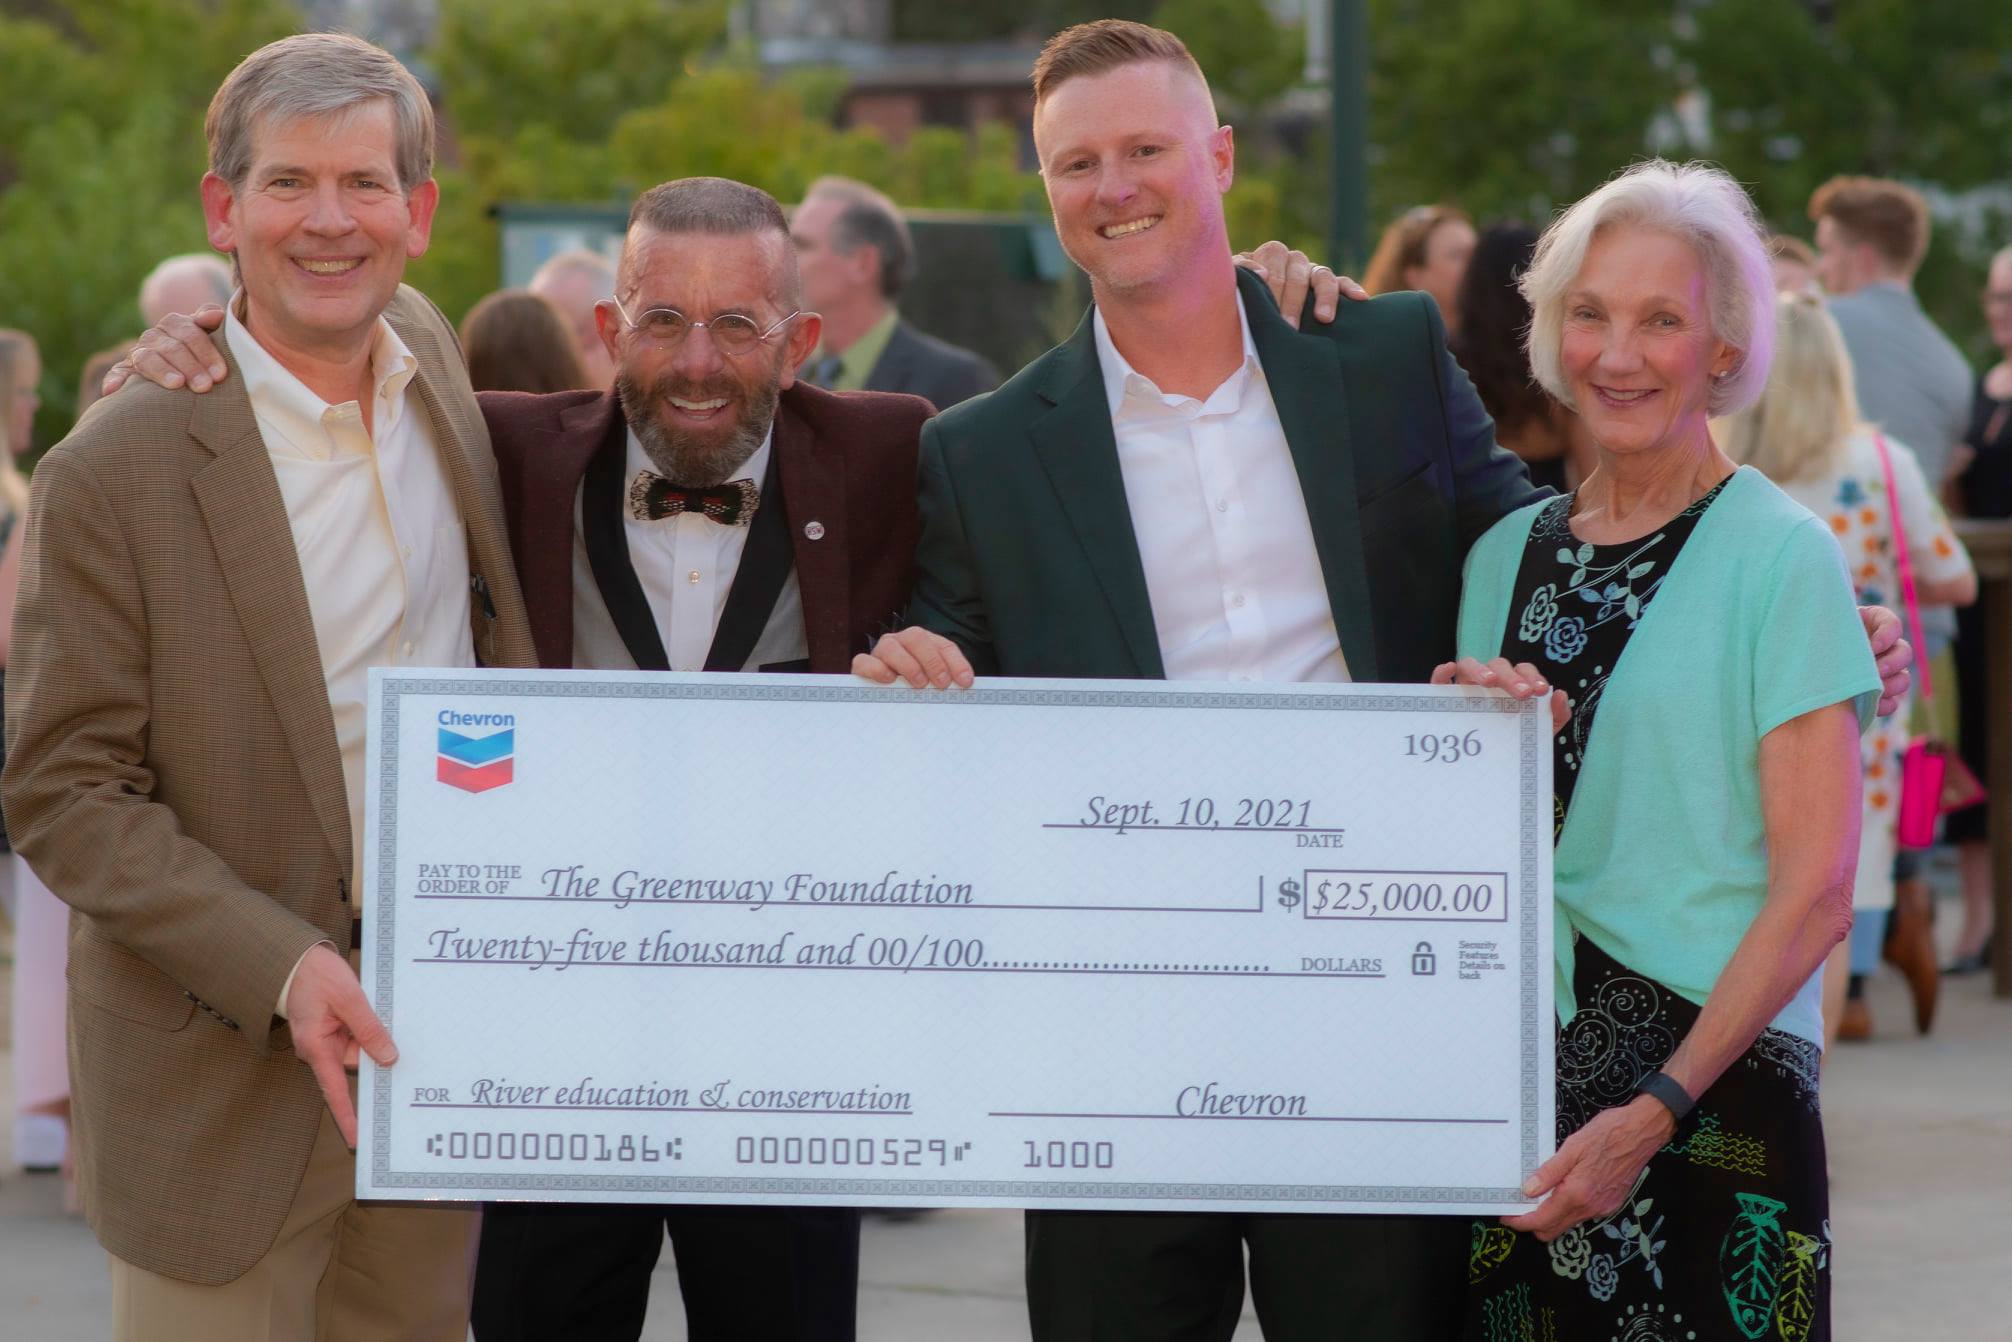 Jeff Shoemaker and Ryan Aids from The Greenway Foundation accept a donation from Chevron.